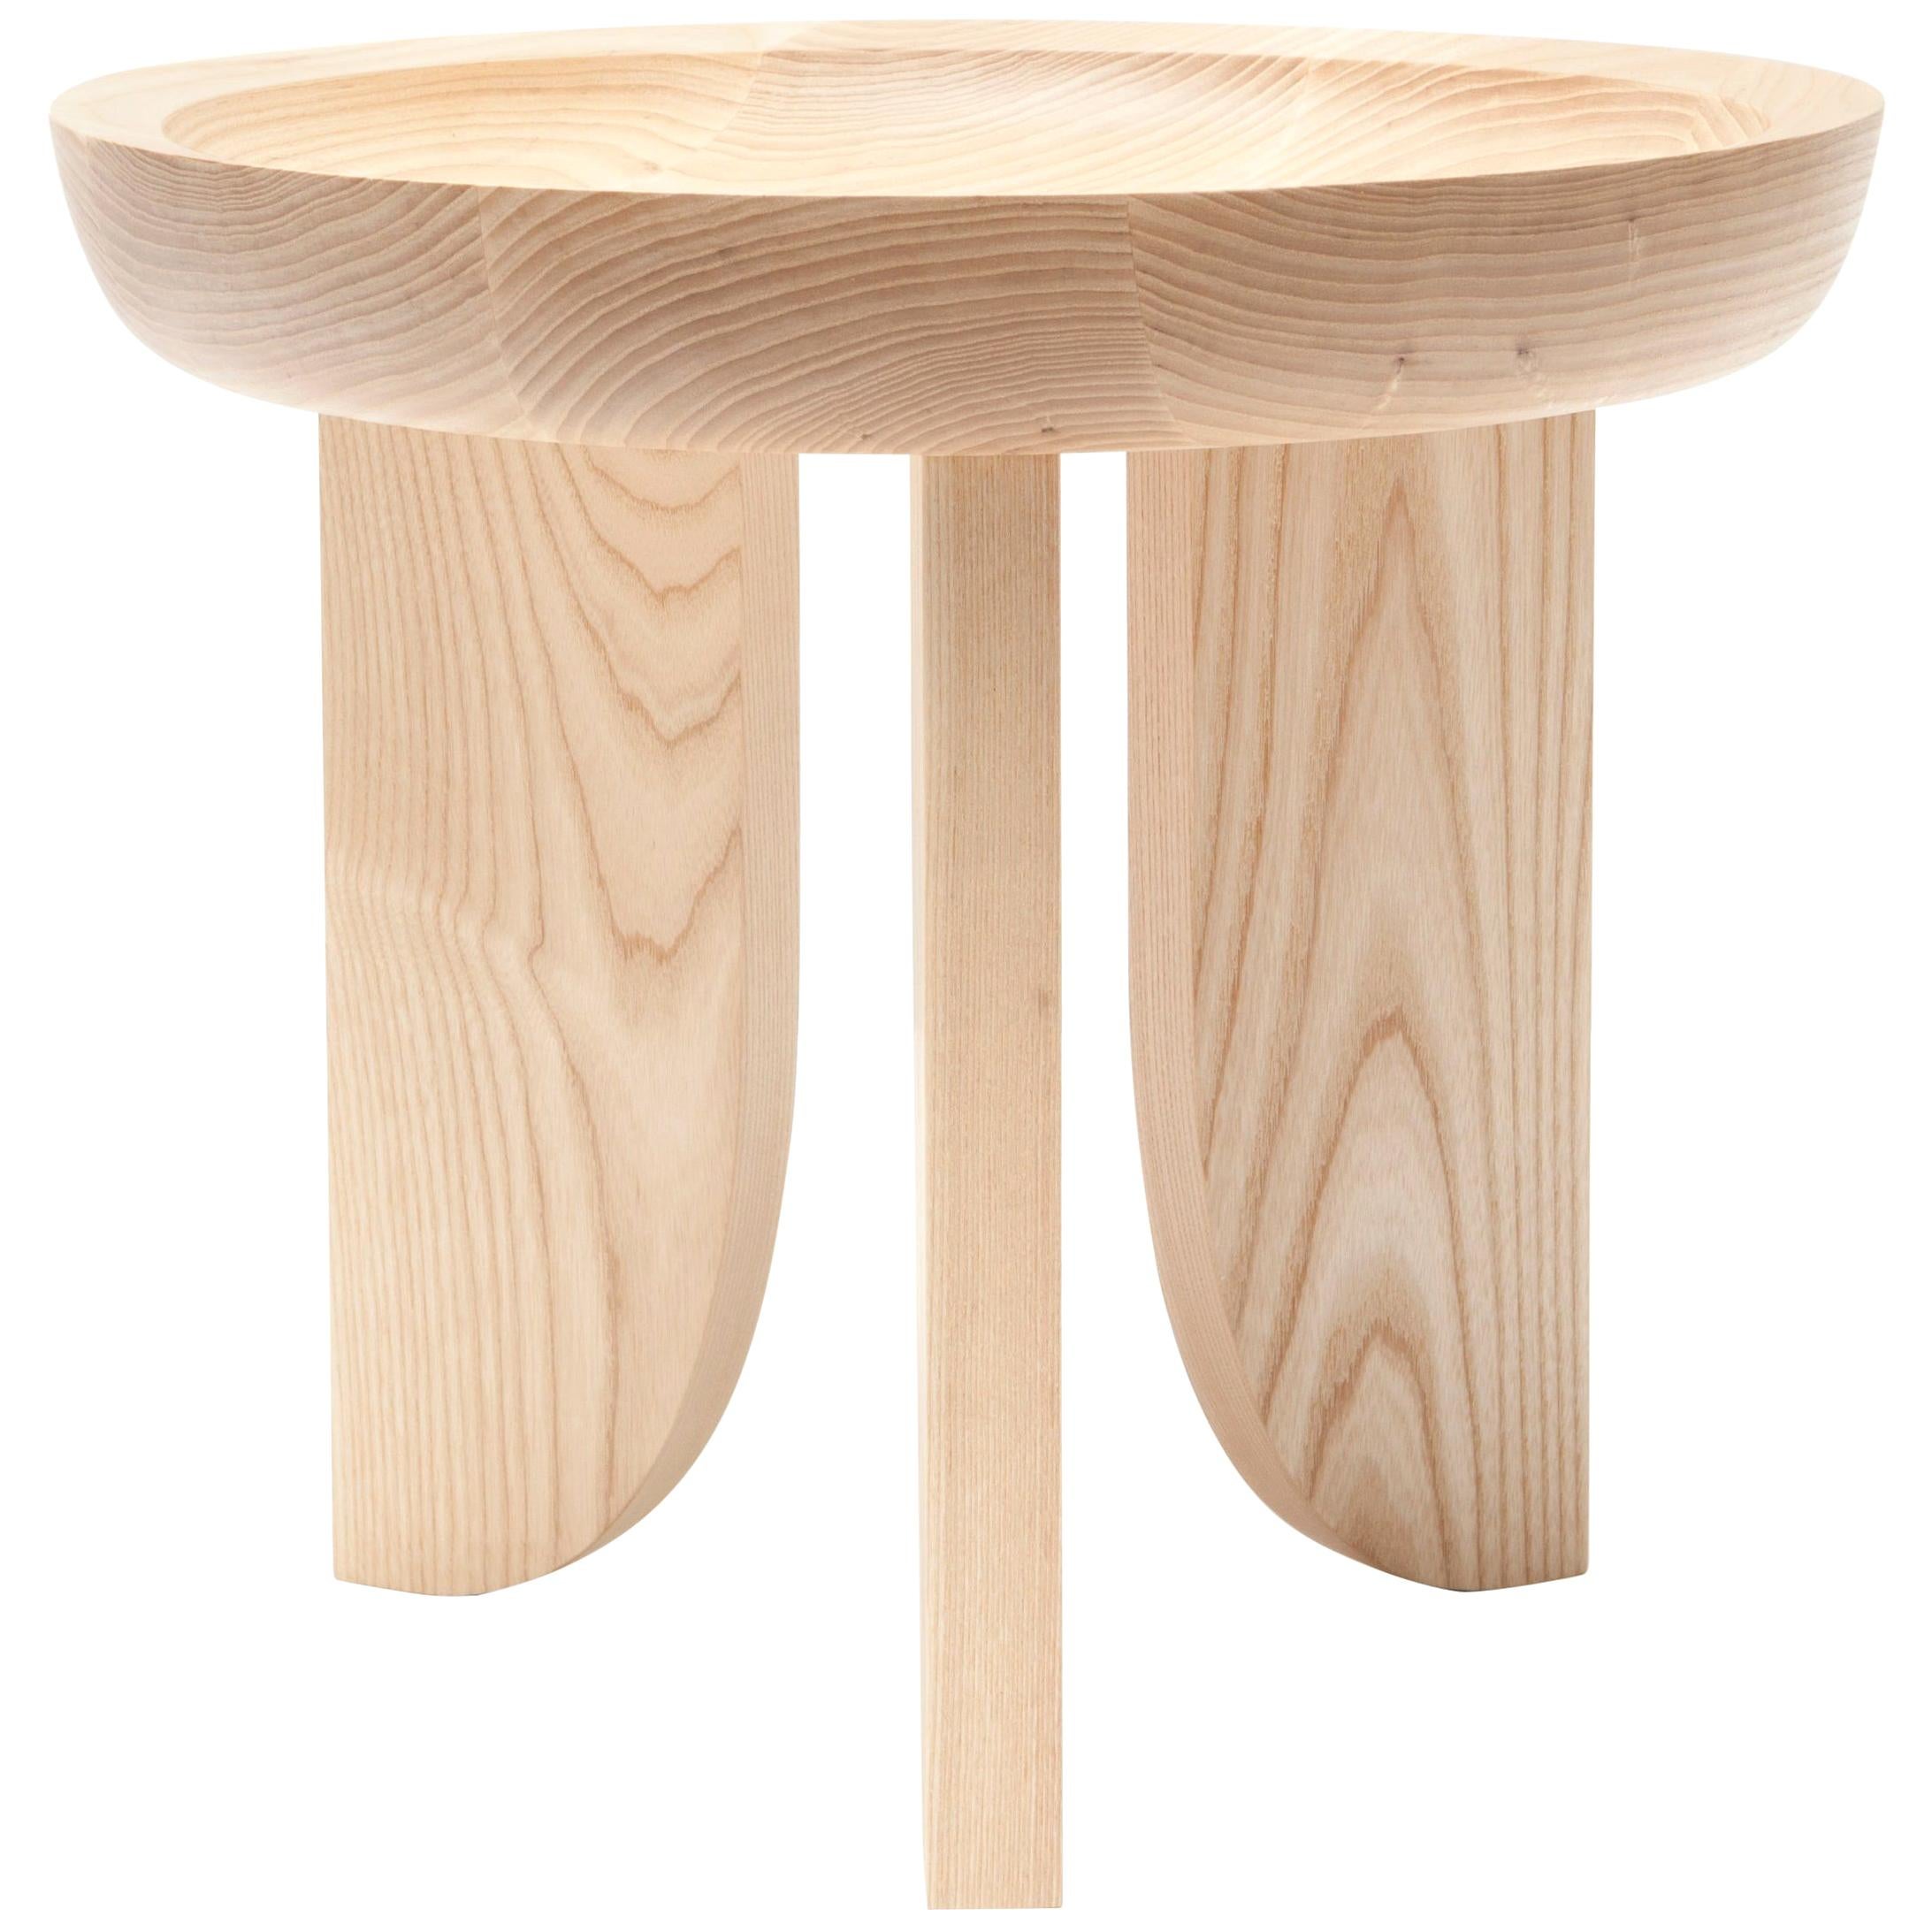 Taking inspiration from hand carved African stools, a scooped out tabletop is created with a little help from technology. A CNC router is used to cut away the wood bowl leaving behind a slope that quickly levels to a flat surface.

Built in the